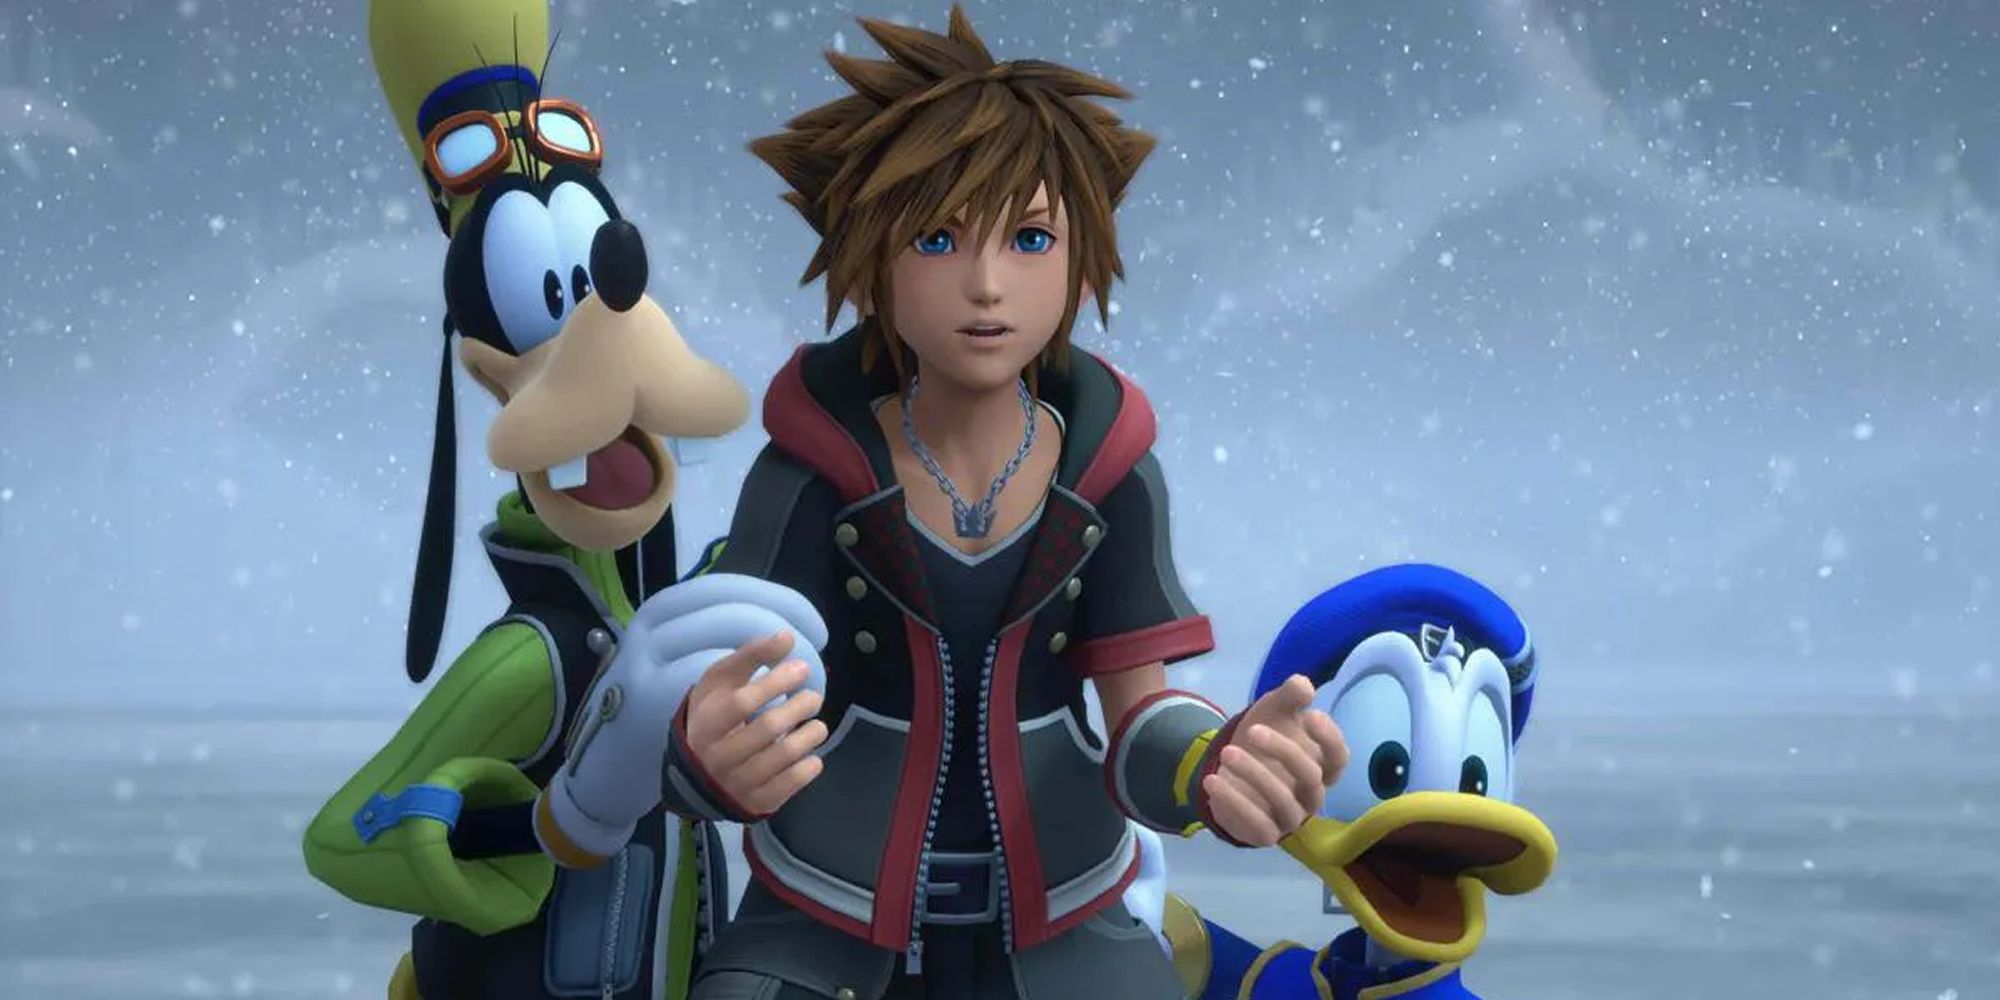 How To Find Every Treasure Chest In Arendelle In Kingdom Hearts 3